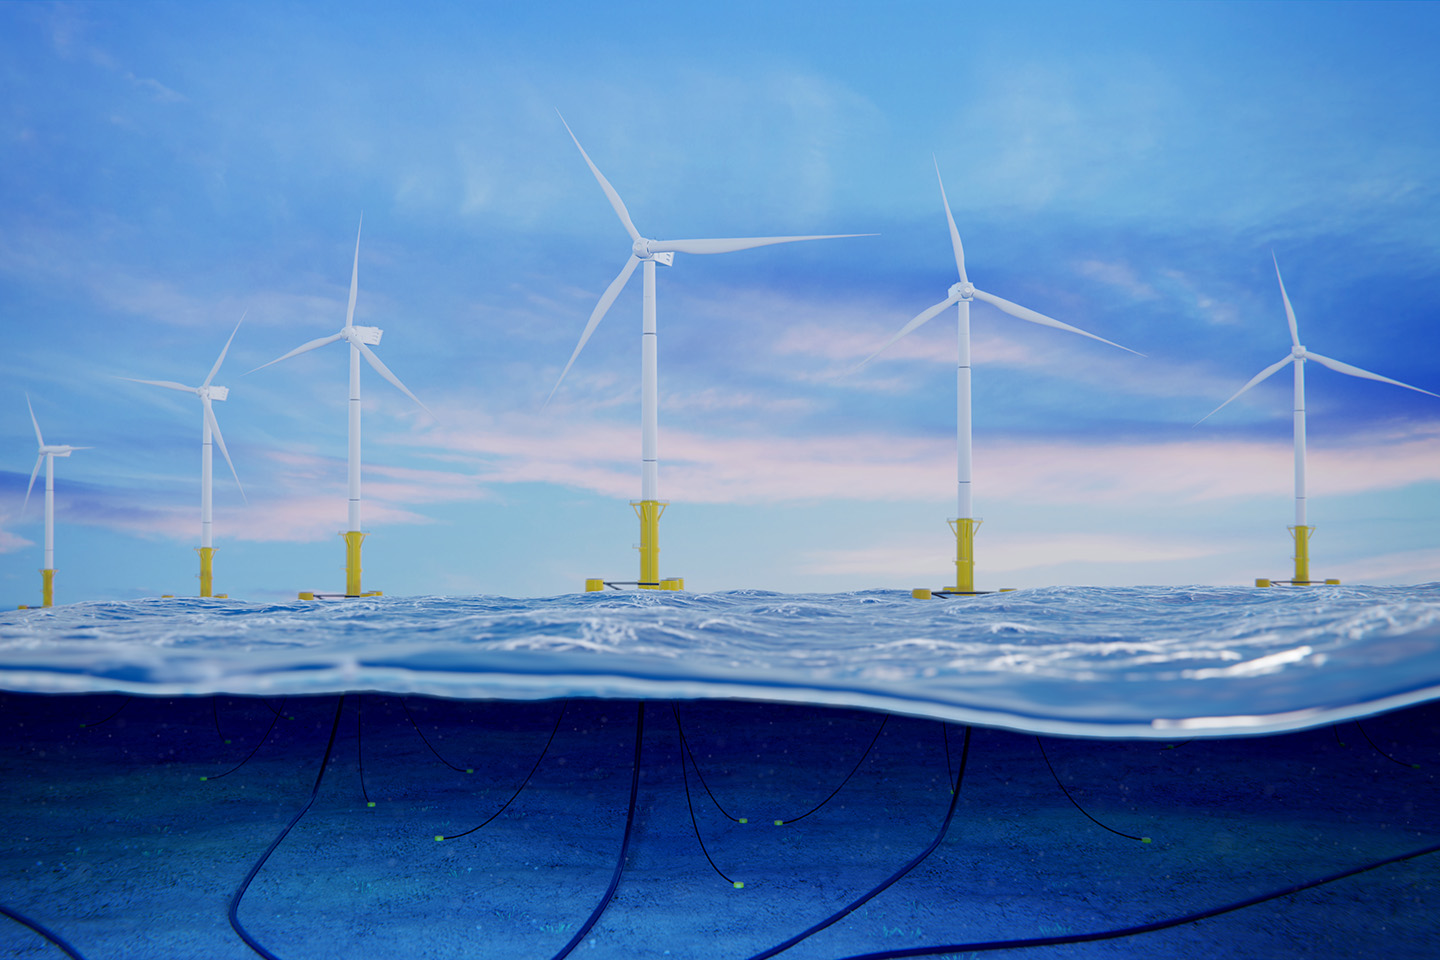 Schematic illustration of an offshore wind farm with underwater power cable.